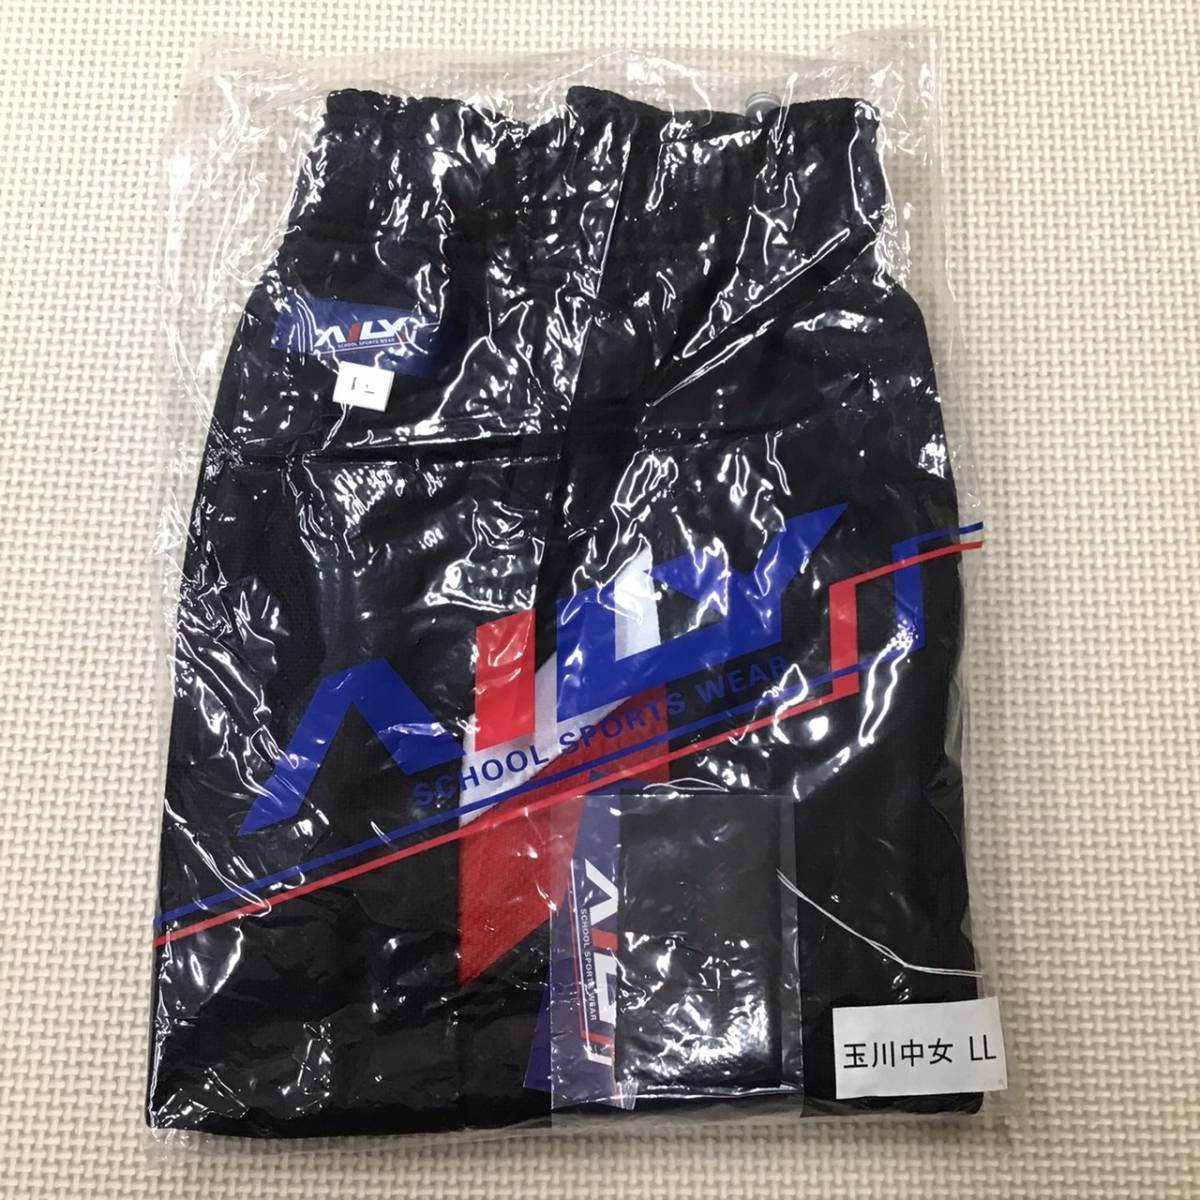 AL4-BLL new goods [ sphere river junior high school ]AILY shorts size LL / black × red × white / jersey / is - bread / short bread / sport wear / junior high school student / gym uniform / gym uniform 